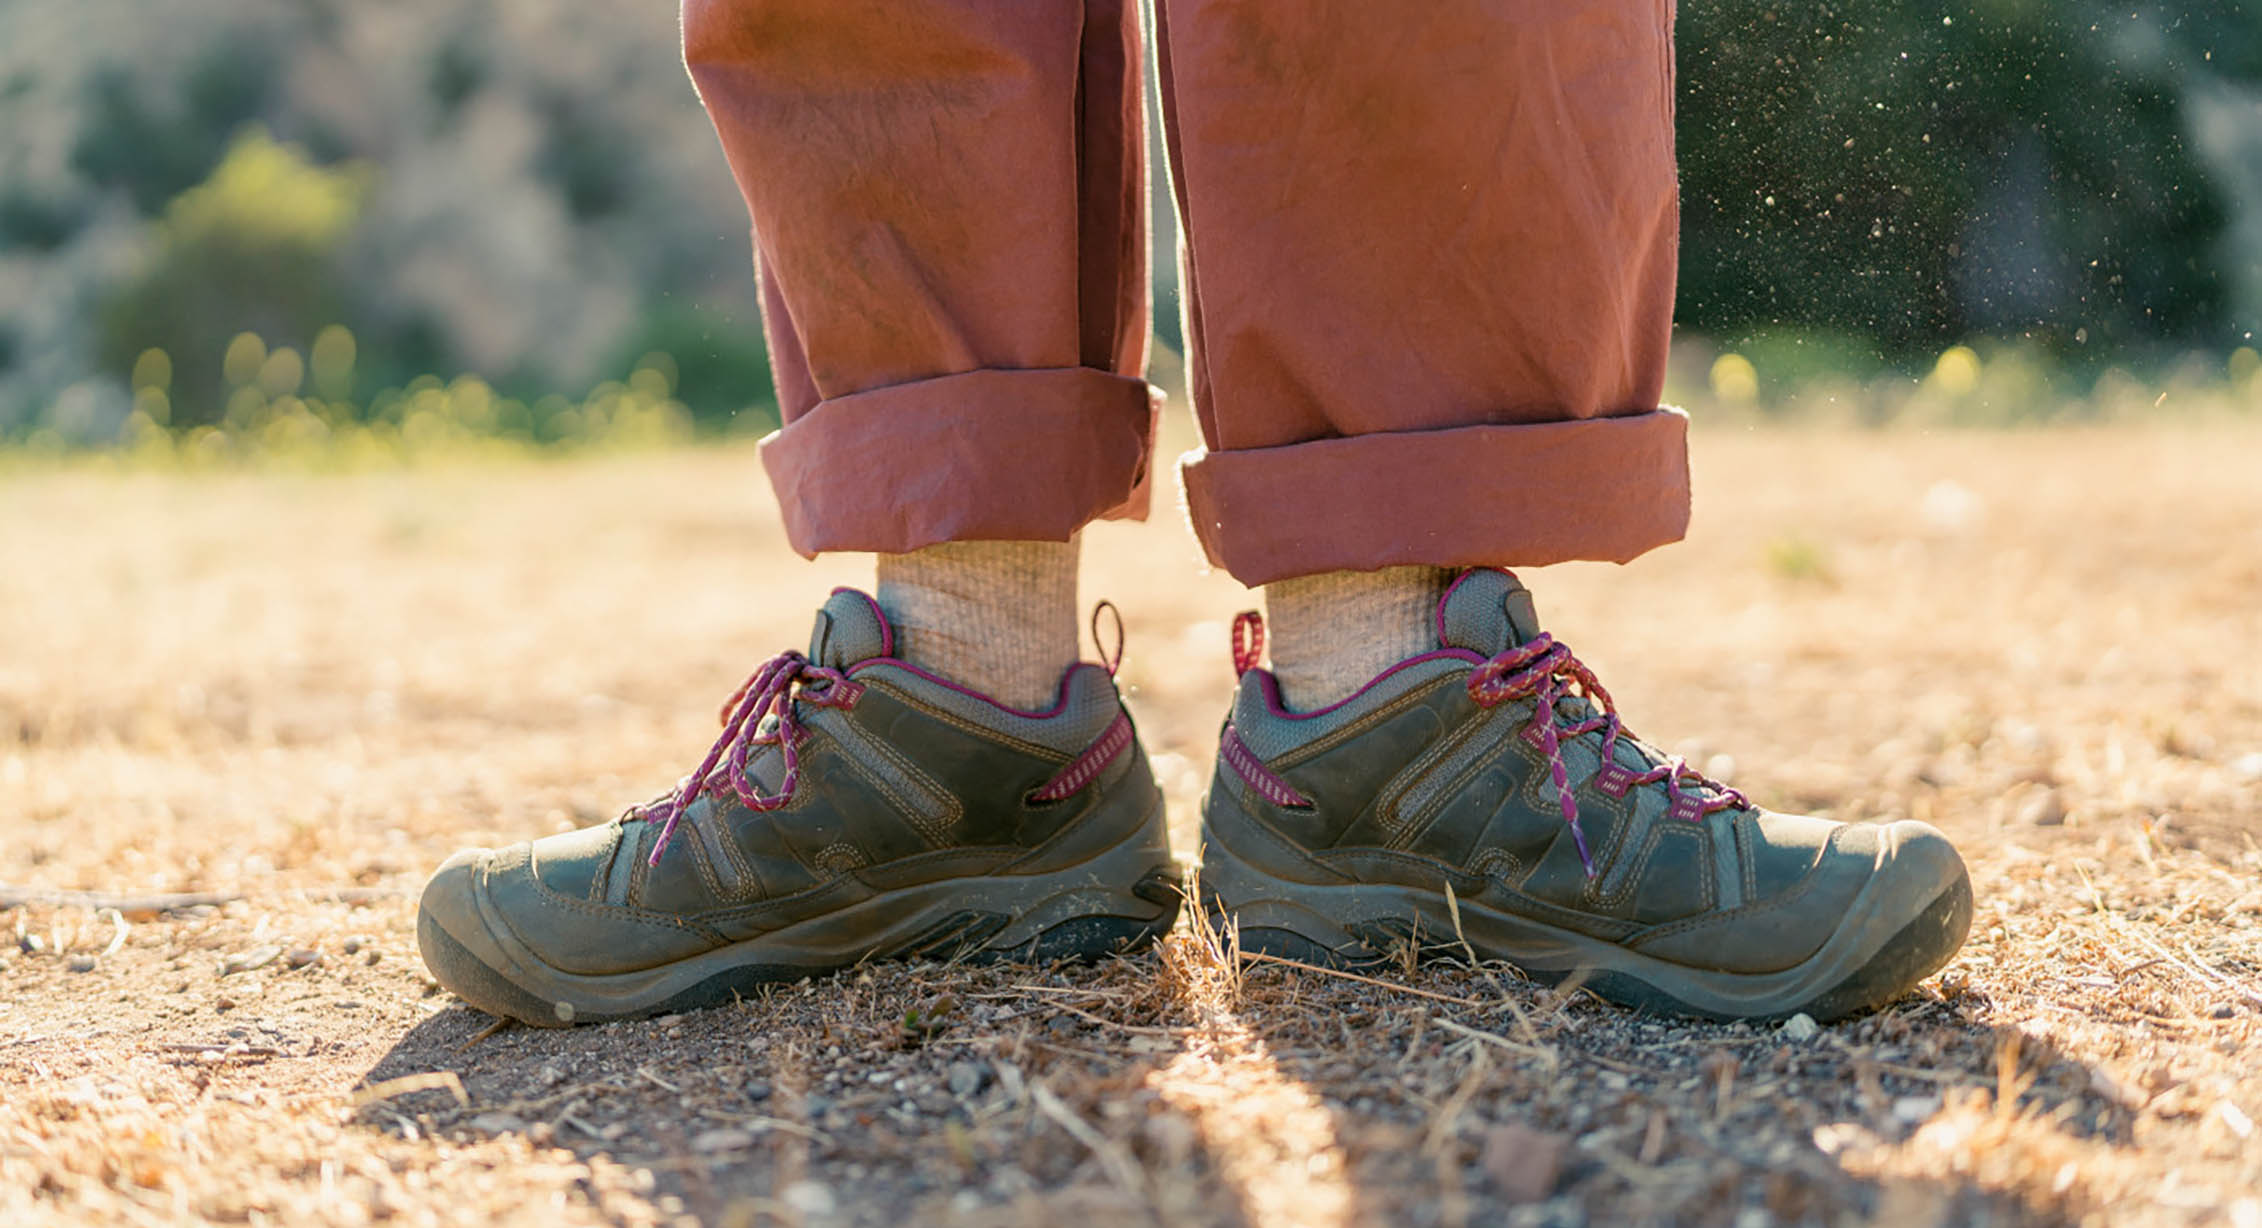 A person in hiking shoes